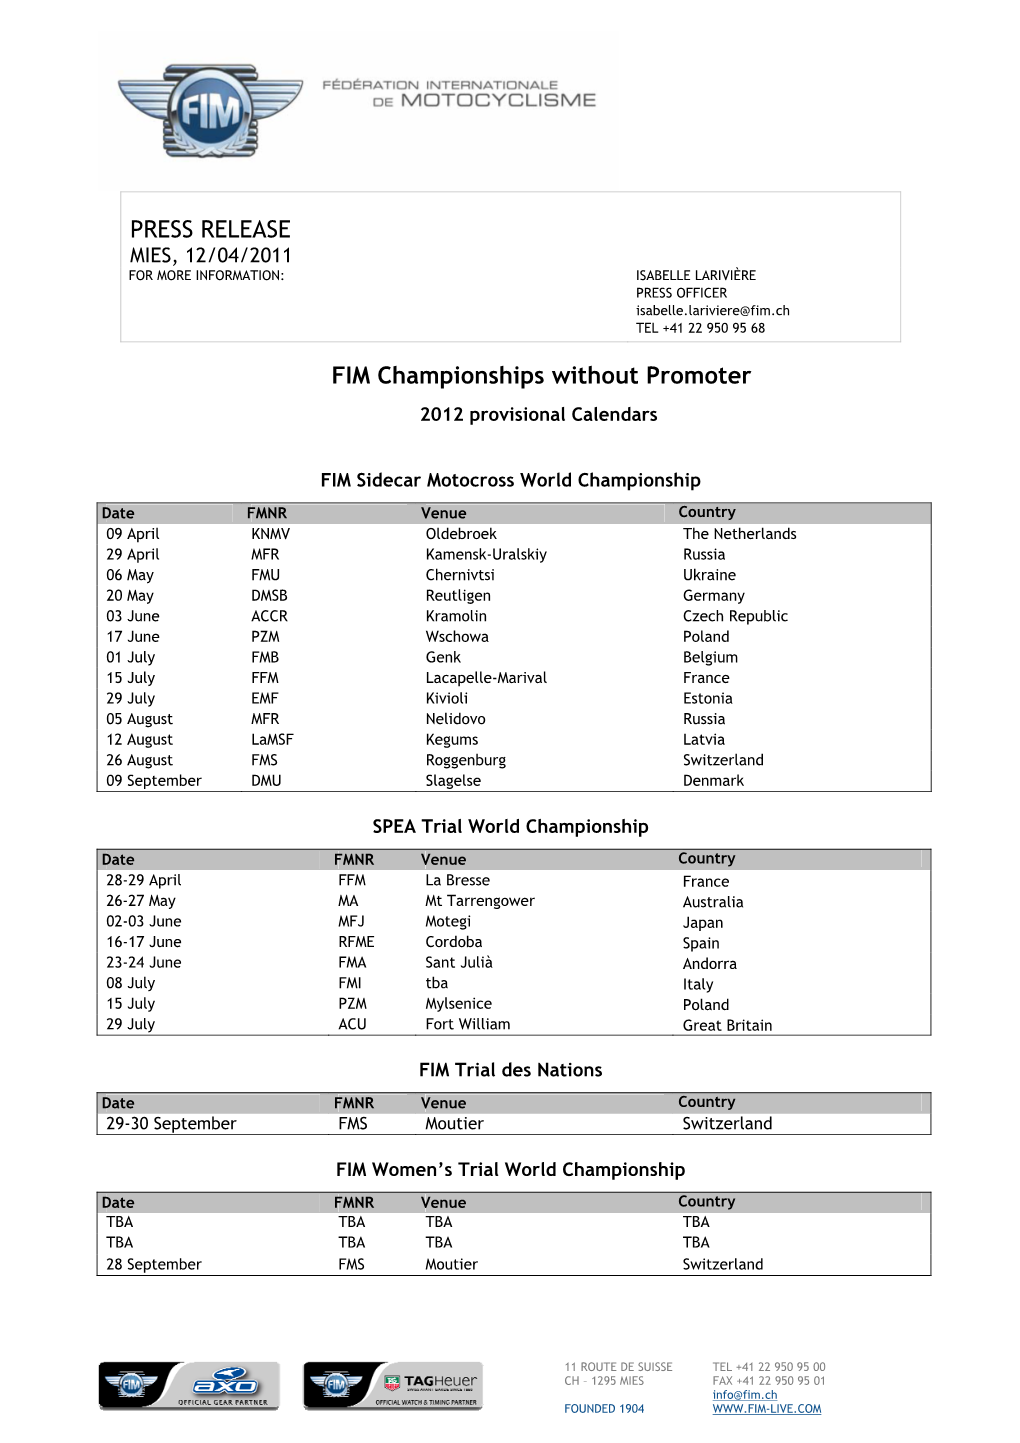 PRESS RELEASE FIM Championships Without Promoter